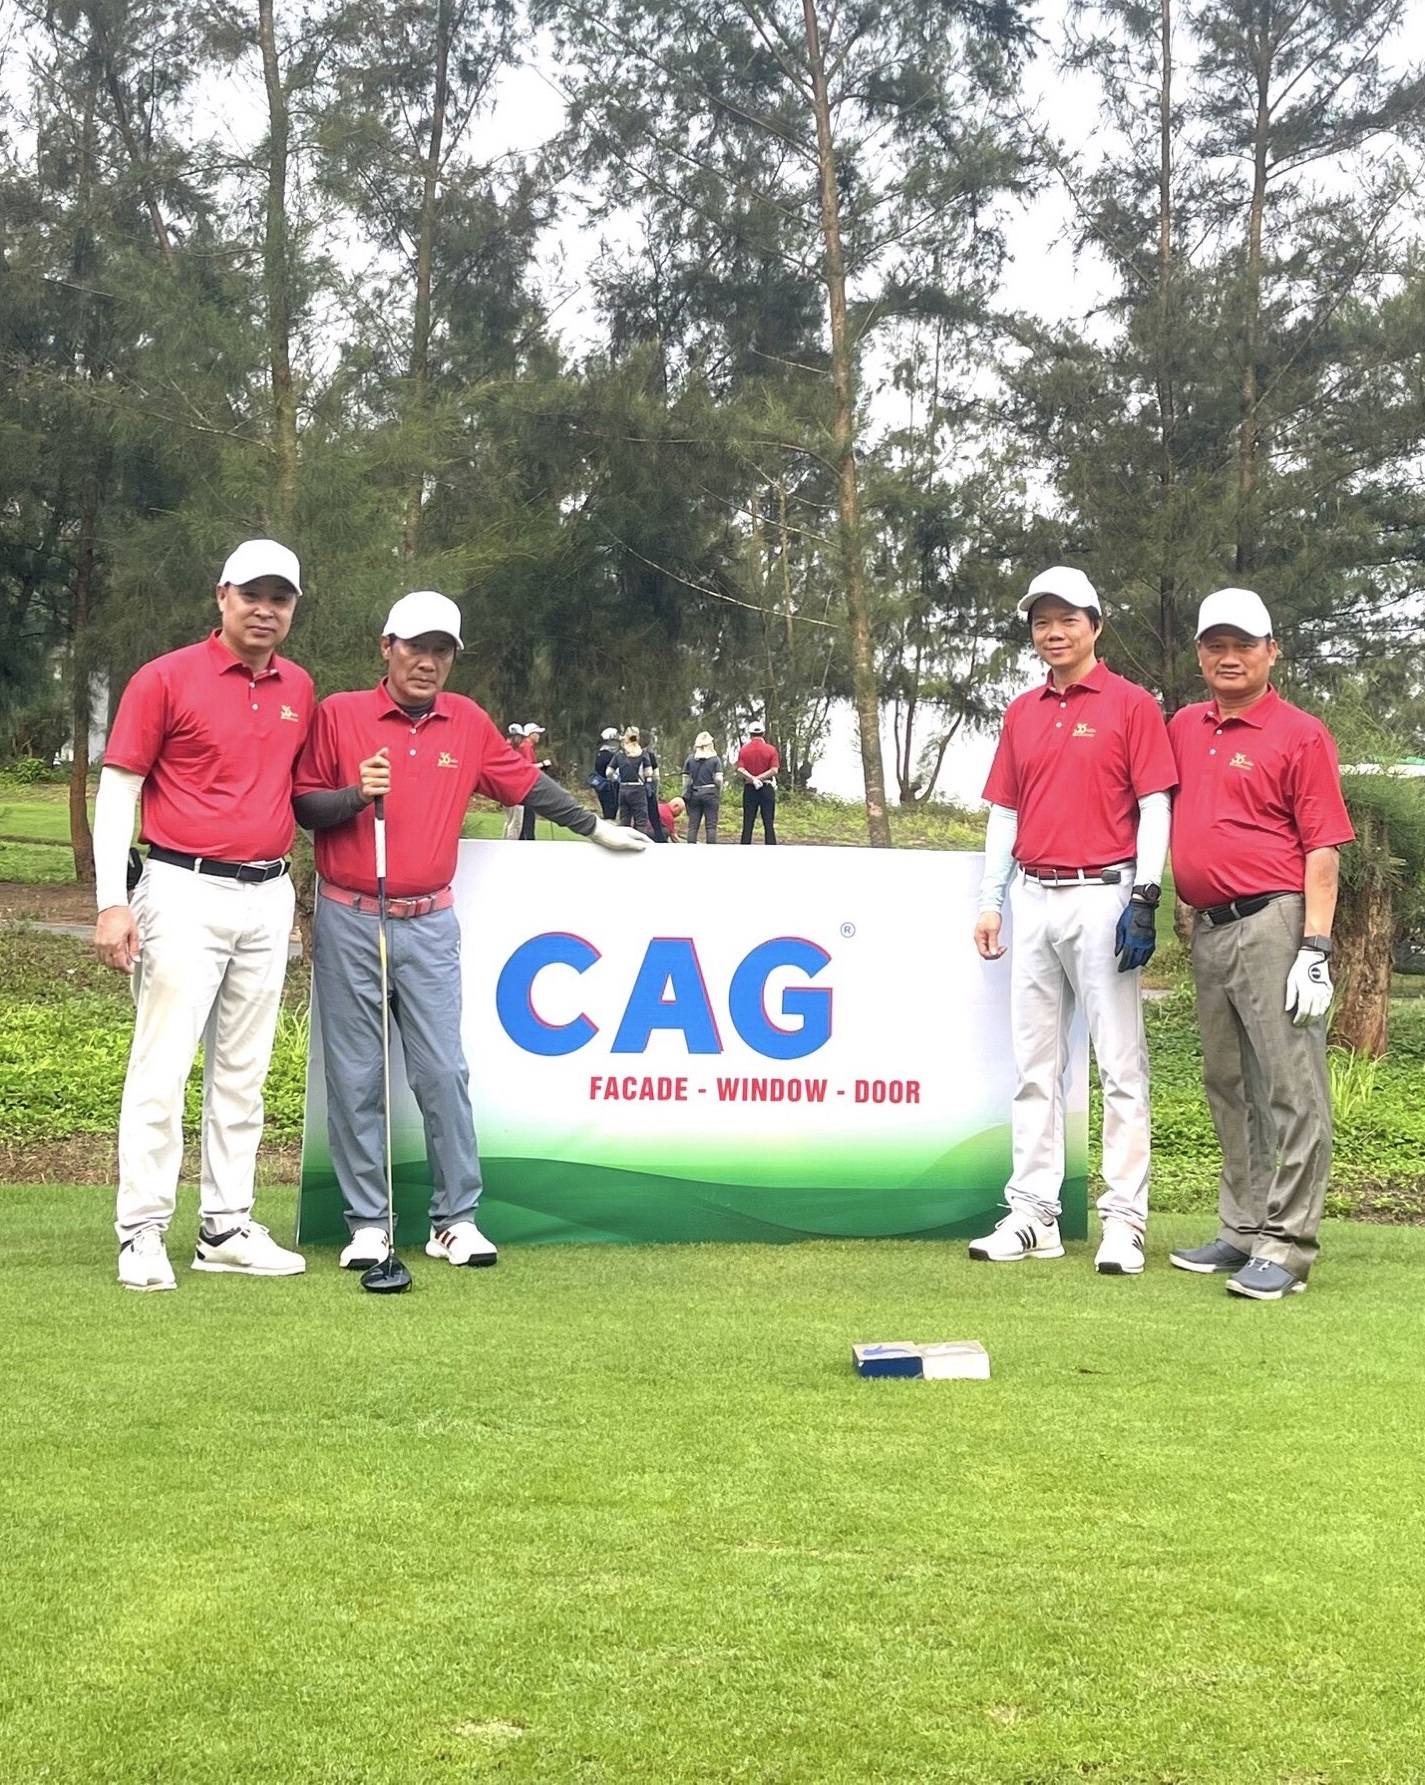 CAG sponsors sports exchange golf tournament “For A Green Future”